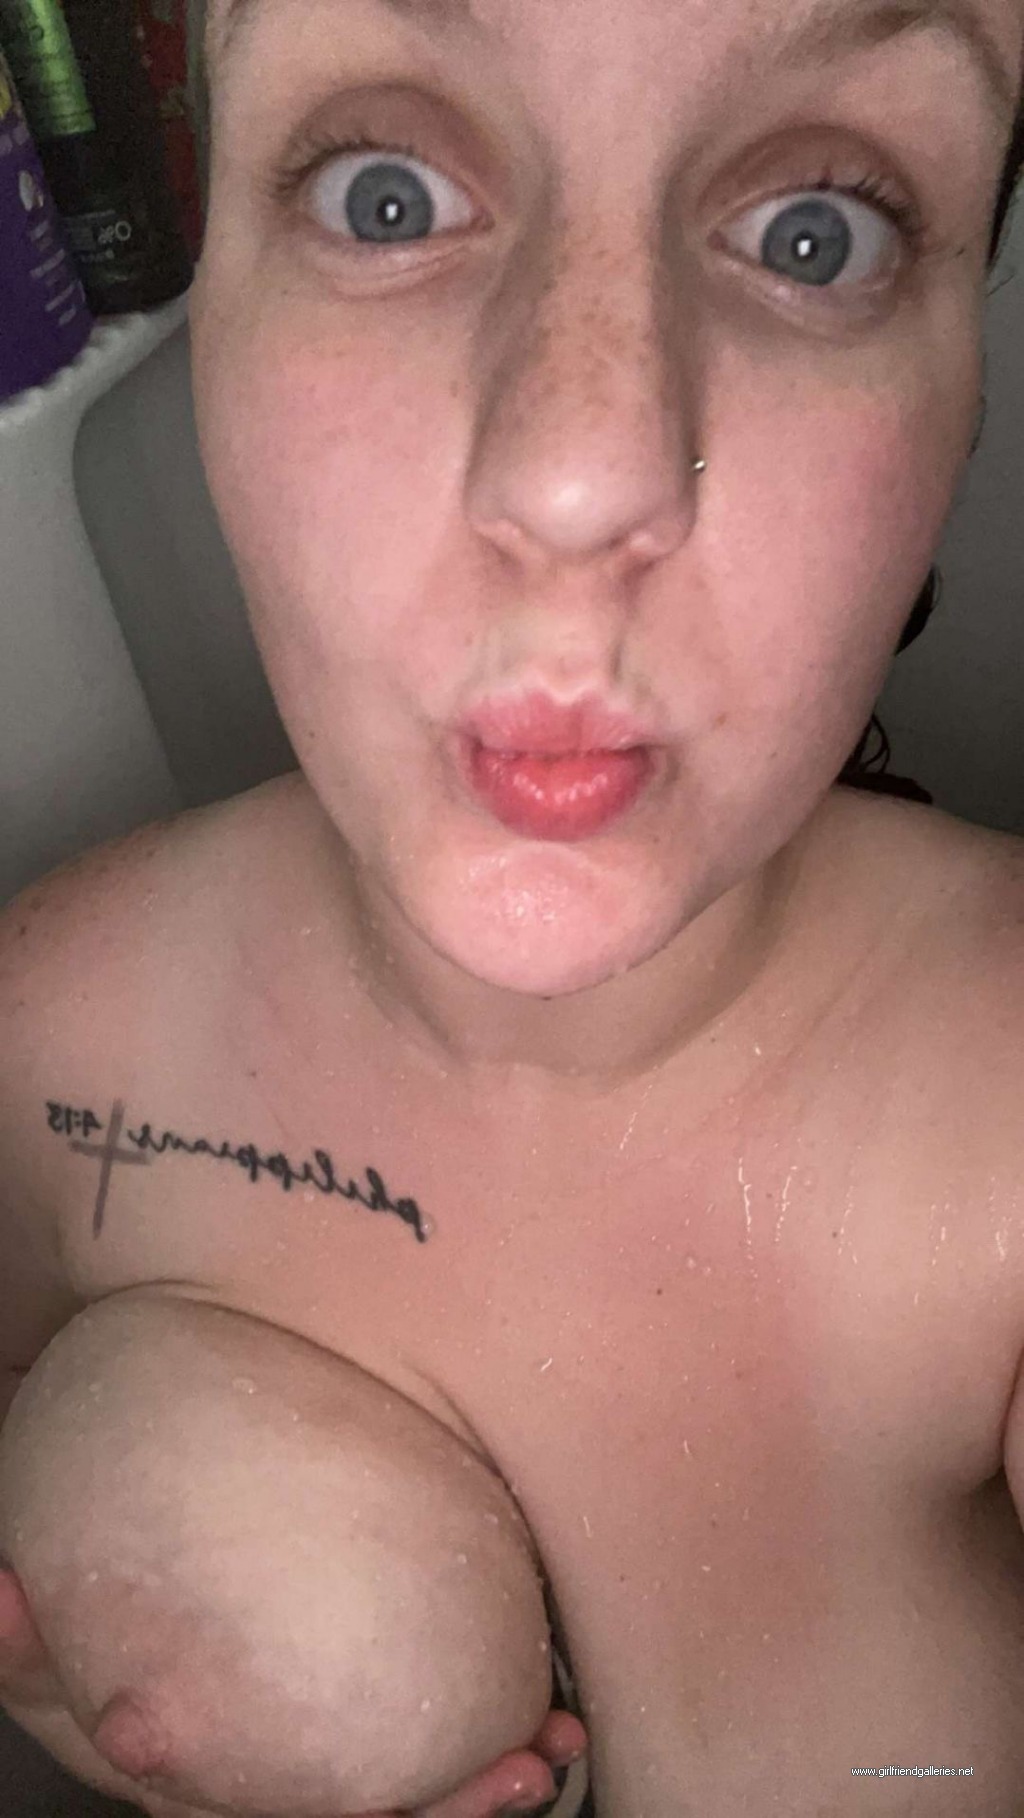 Wife’s tits